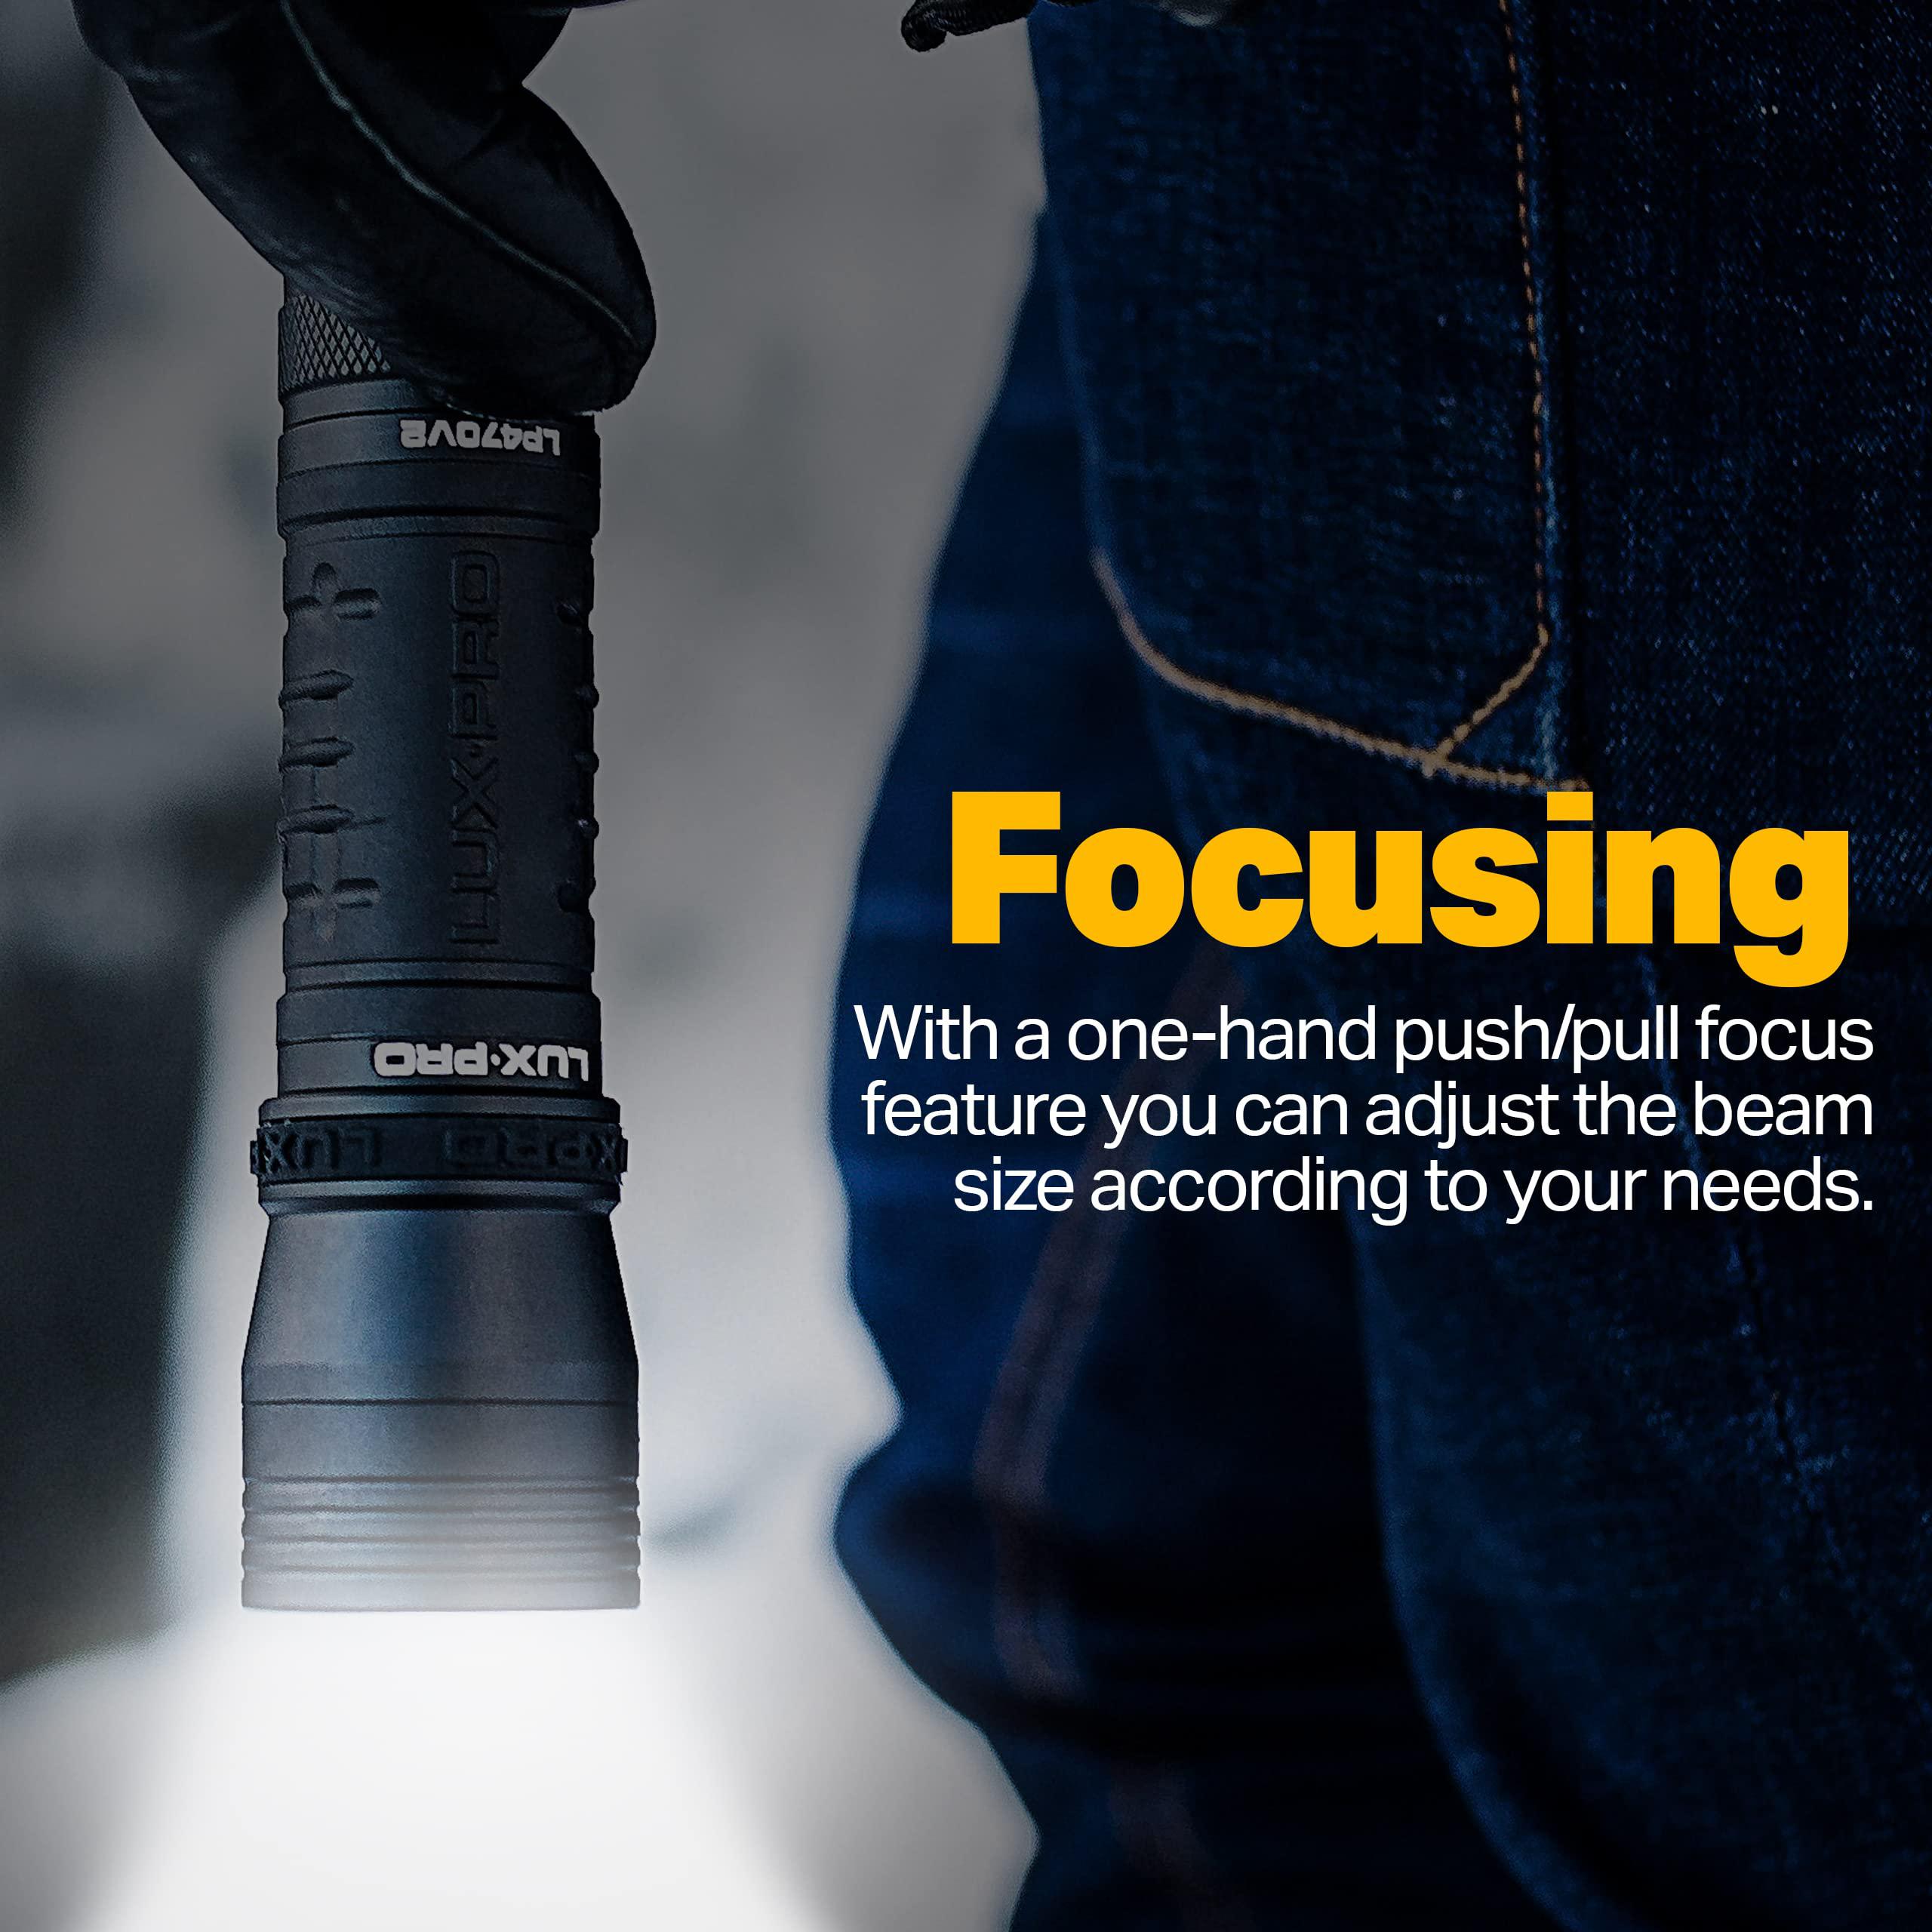 Lux-Pro luxpro focus 380 lumen handheld led flashlight - features patented tackgrip and aircraft-grade aluminum - pocket-sized campin